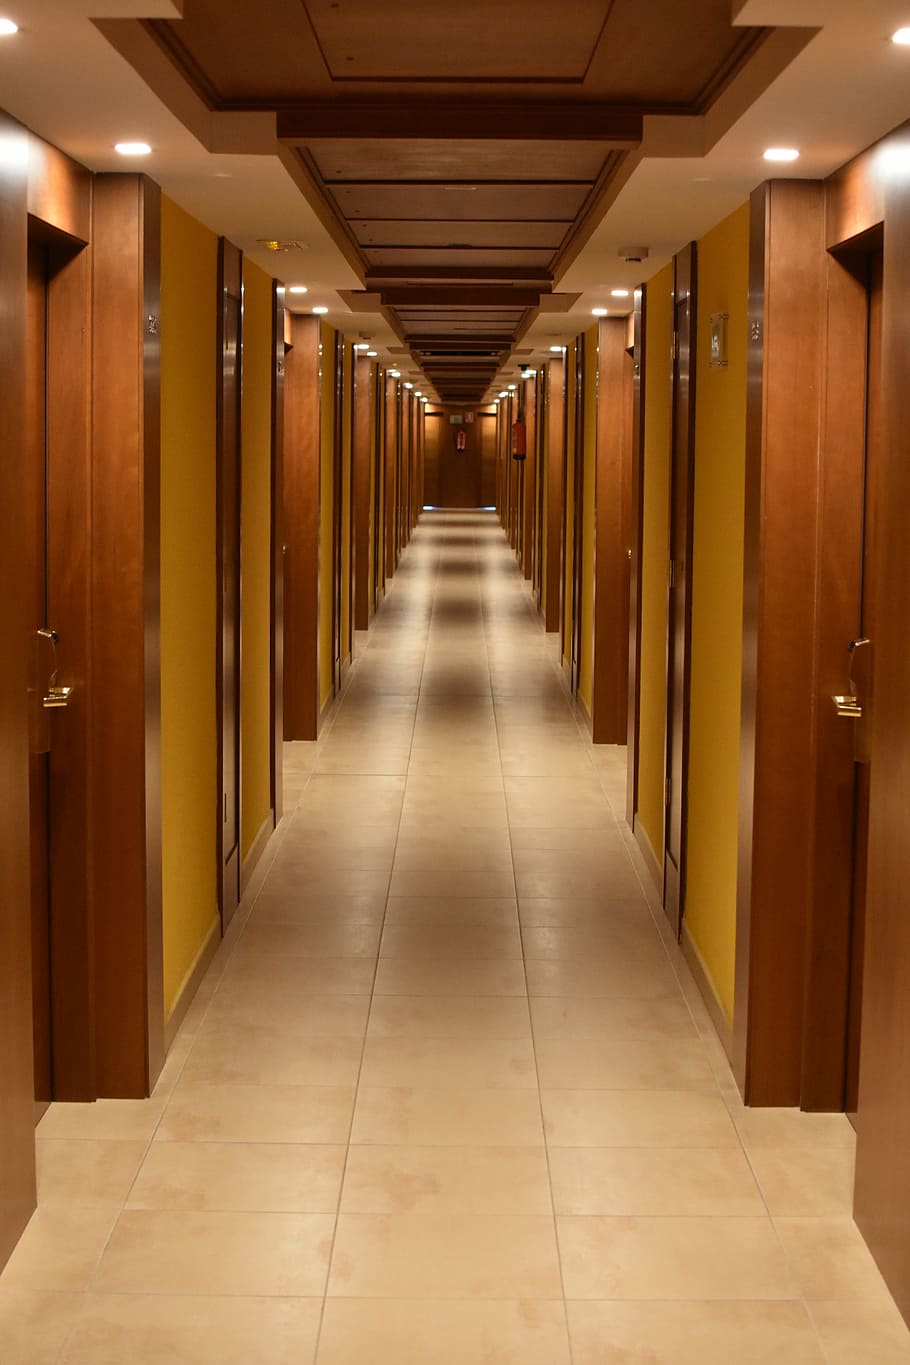 photo of hallway, gang, hotel, building, aisle, architecture, perspective, doors, floor, chambers